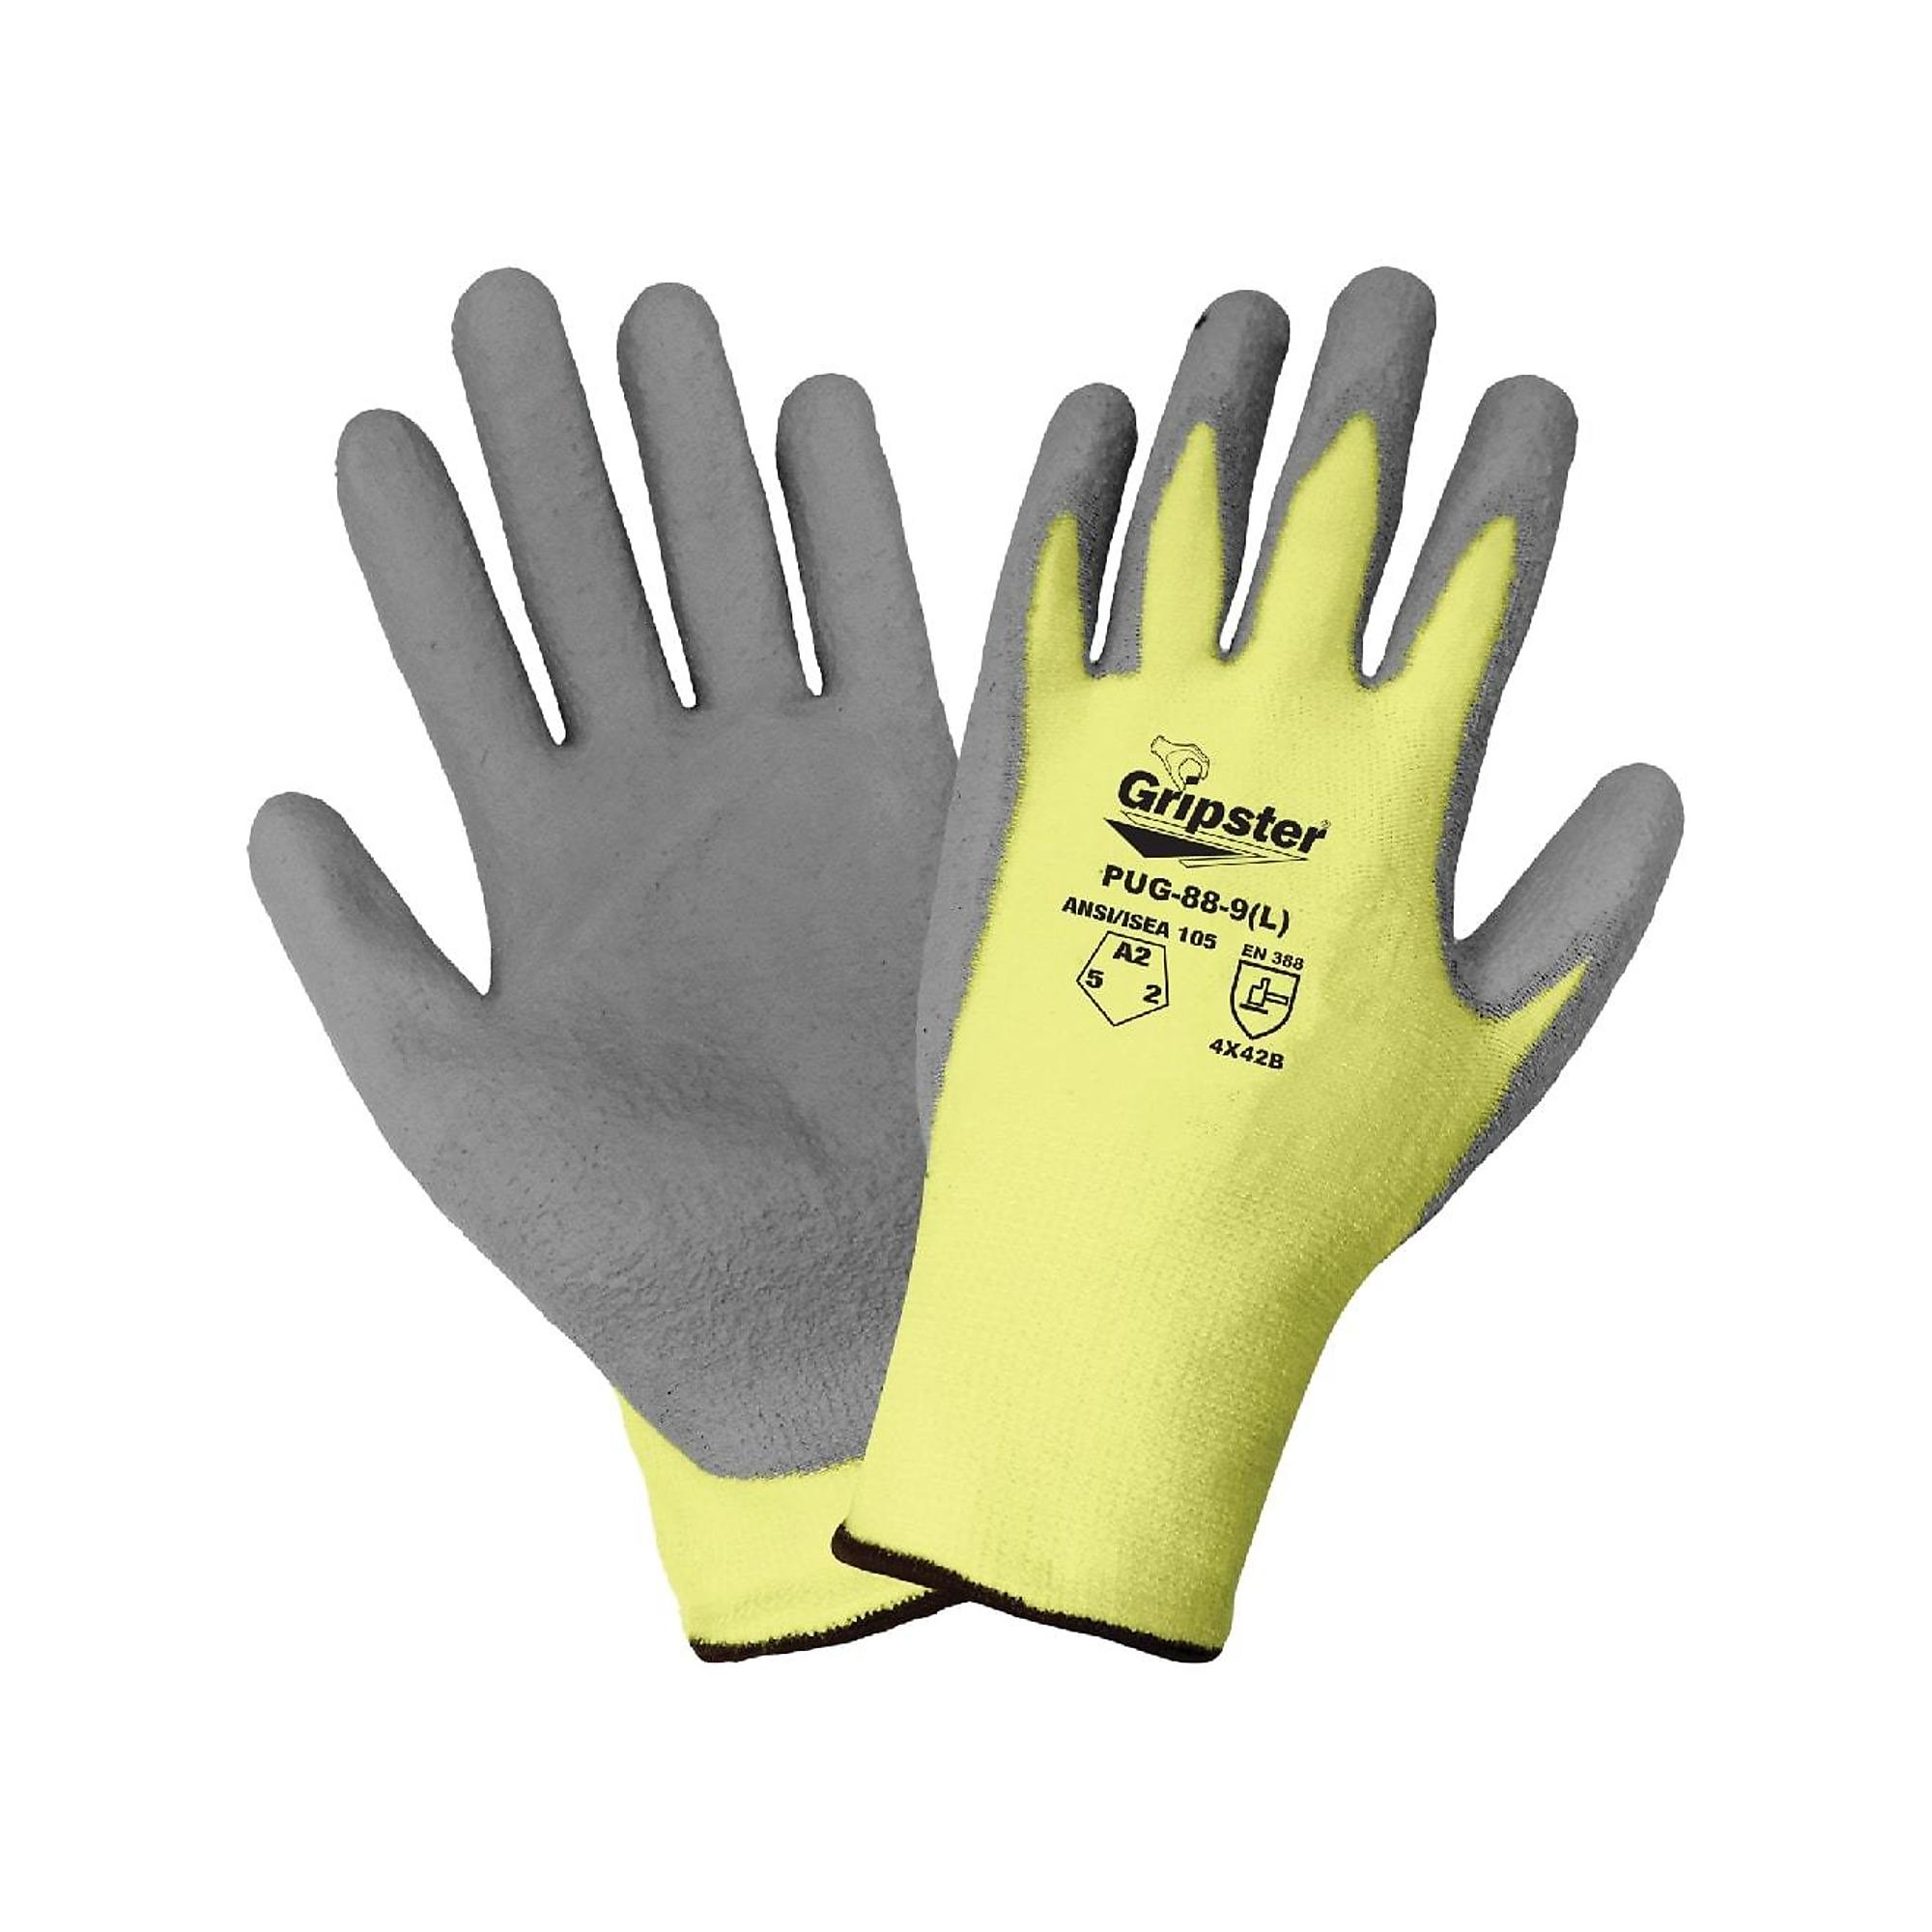 Global Glove Gripster , Yellow, Poly Coated, Cut Resistant A2 Gloves - 12 Pairs, Size M, Color Yellow/Gray, Included (qty.) 12 Model PUG-88-8(M)